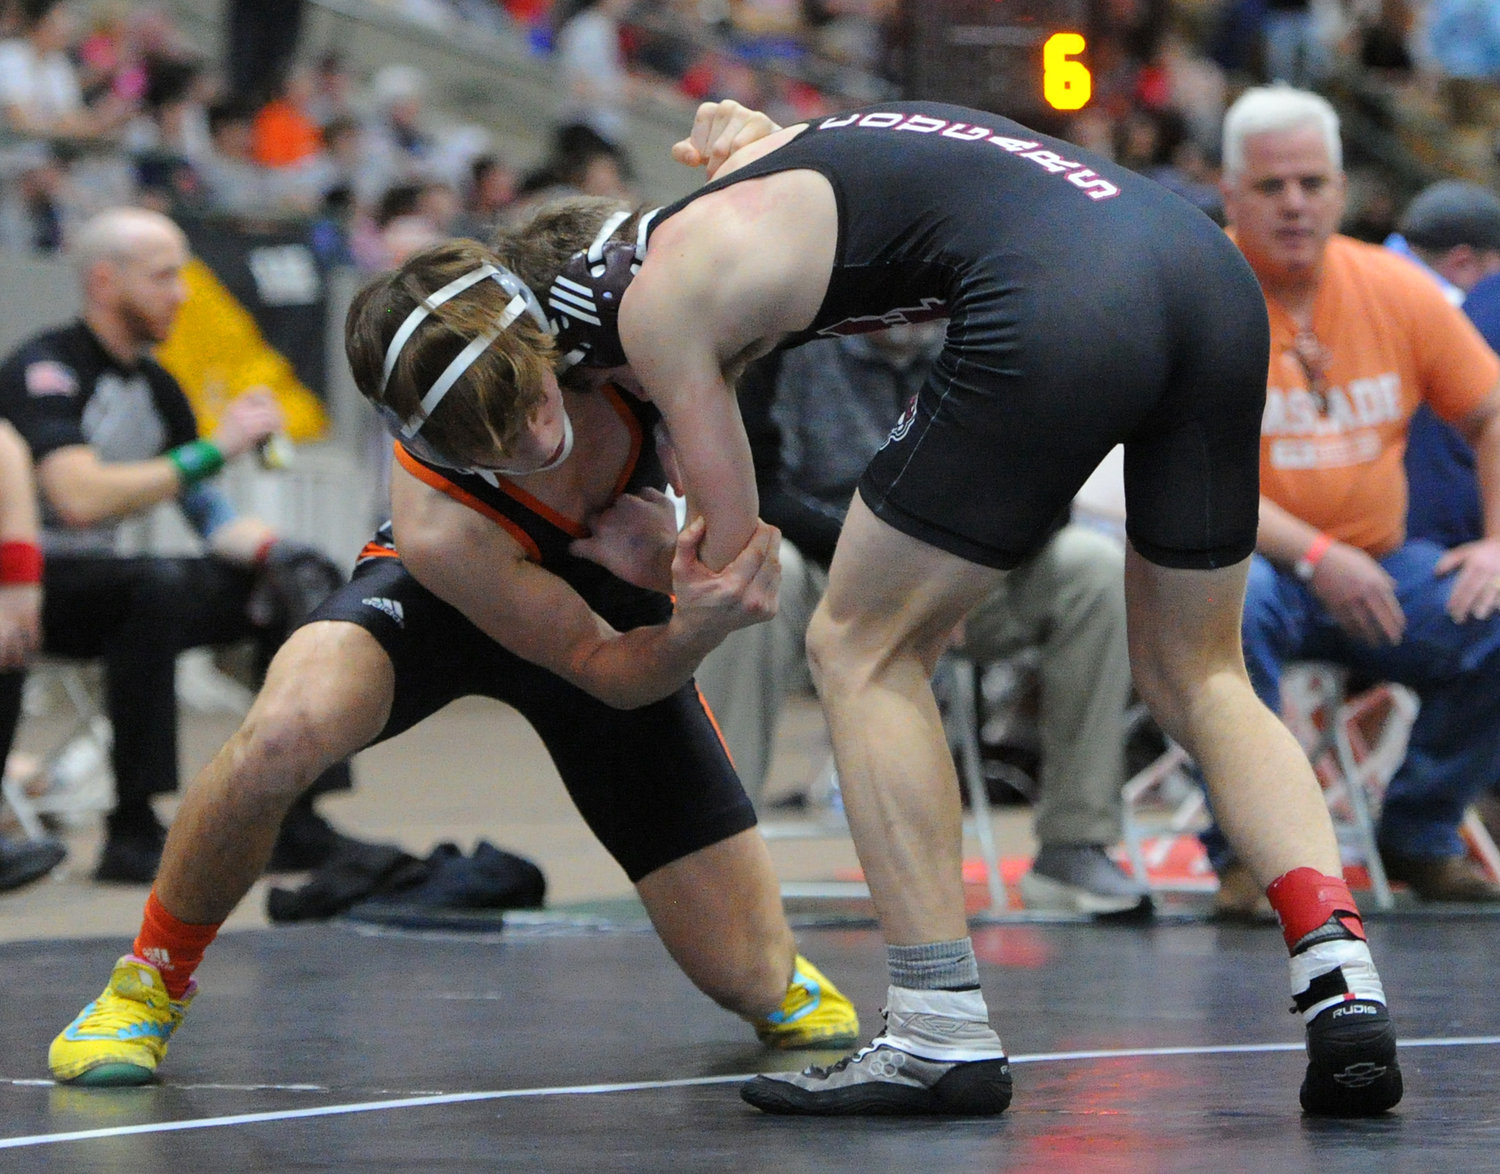 Vayden Moore stabilizes himself in his tournament opener in the 126-pound Class A bracket.